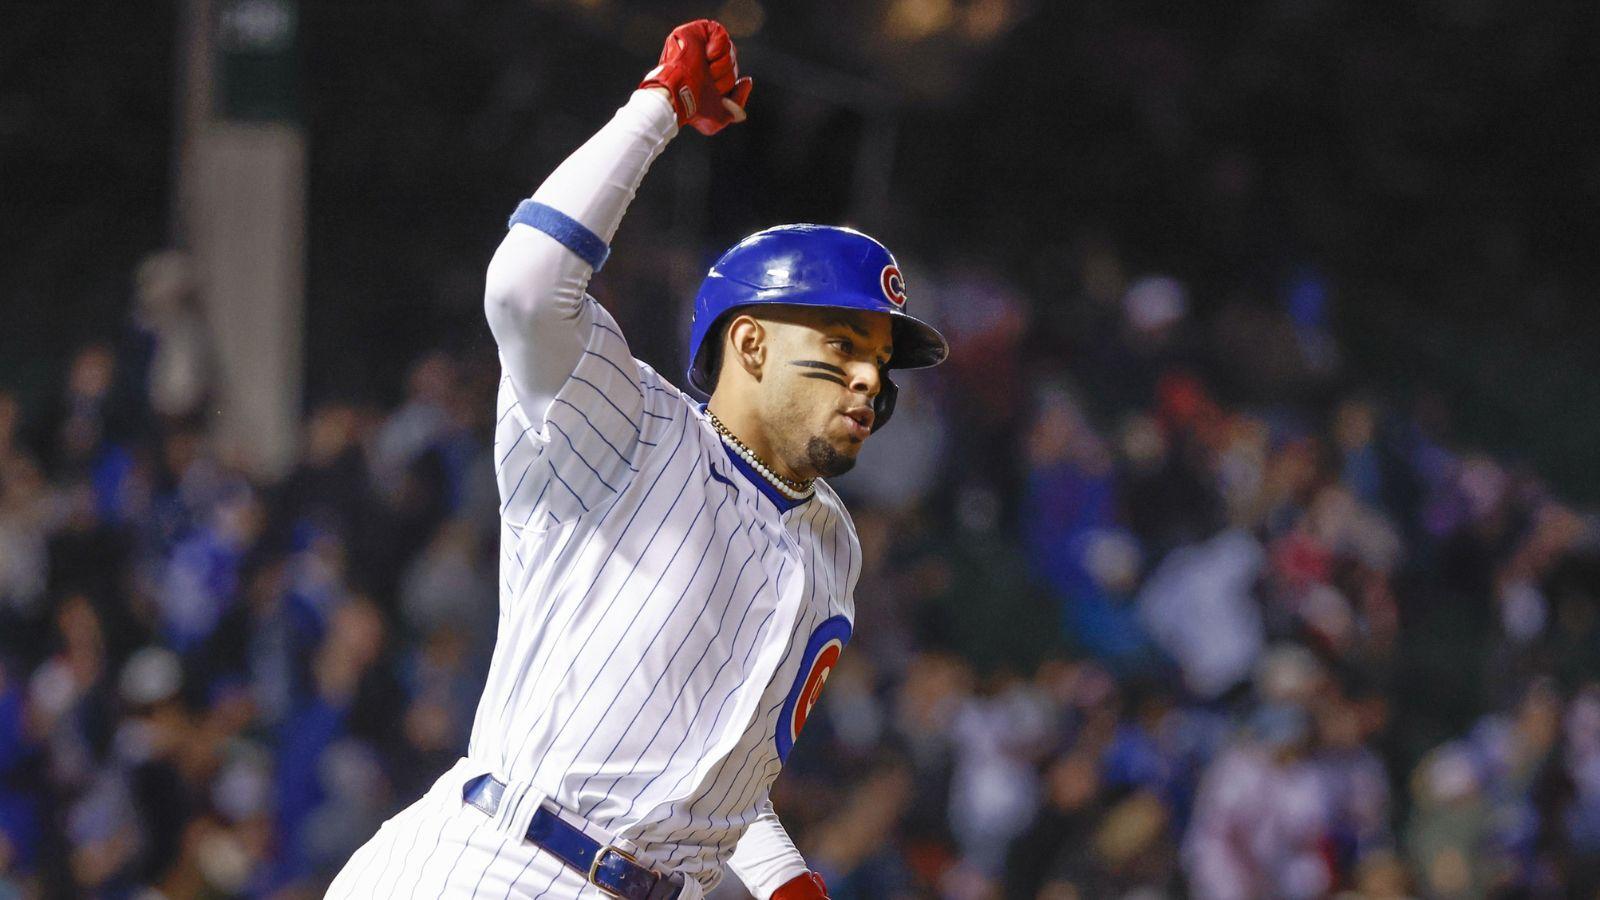 With Bellinger and Candelario, Cubs are ready to make move